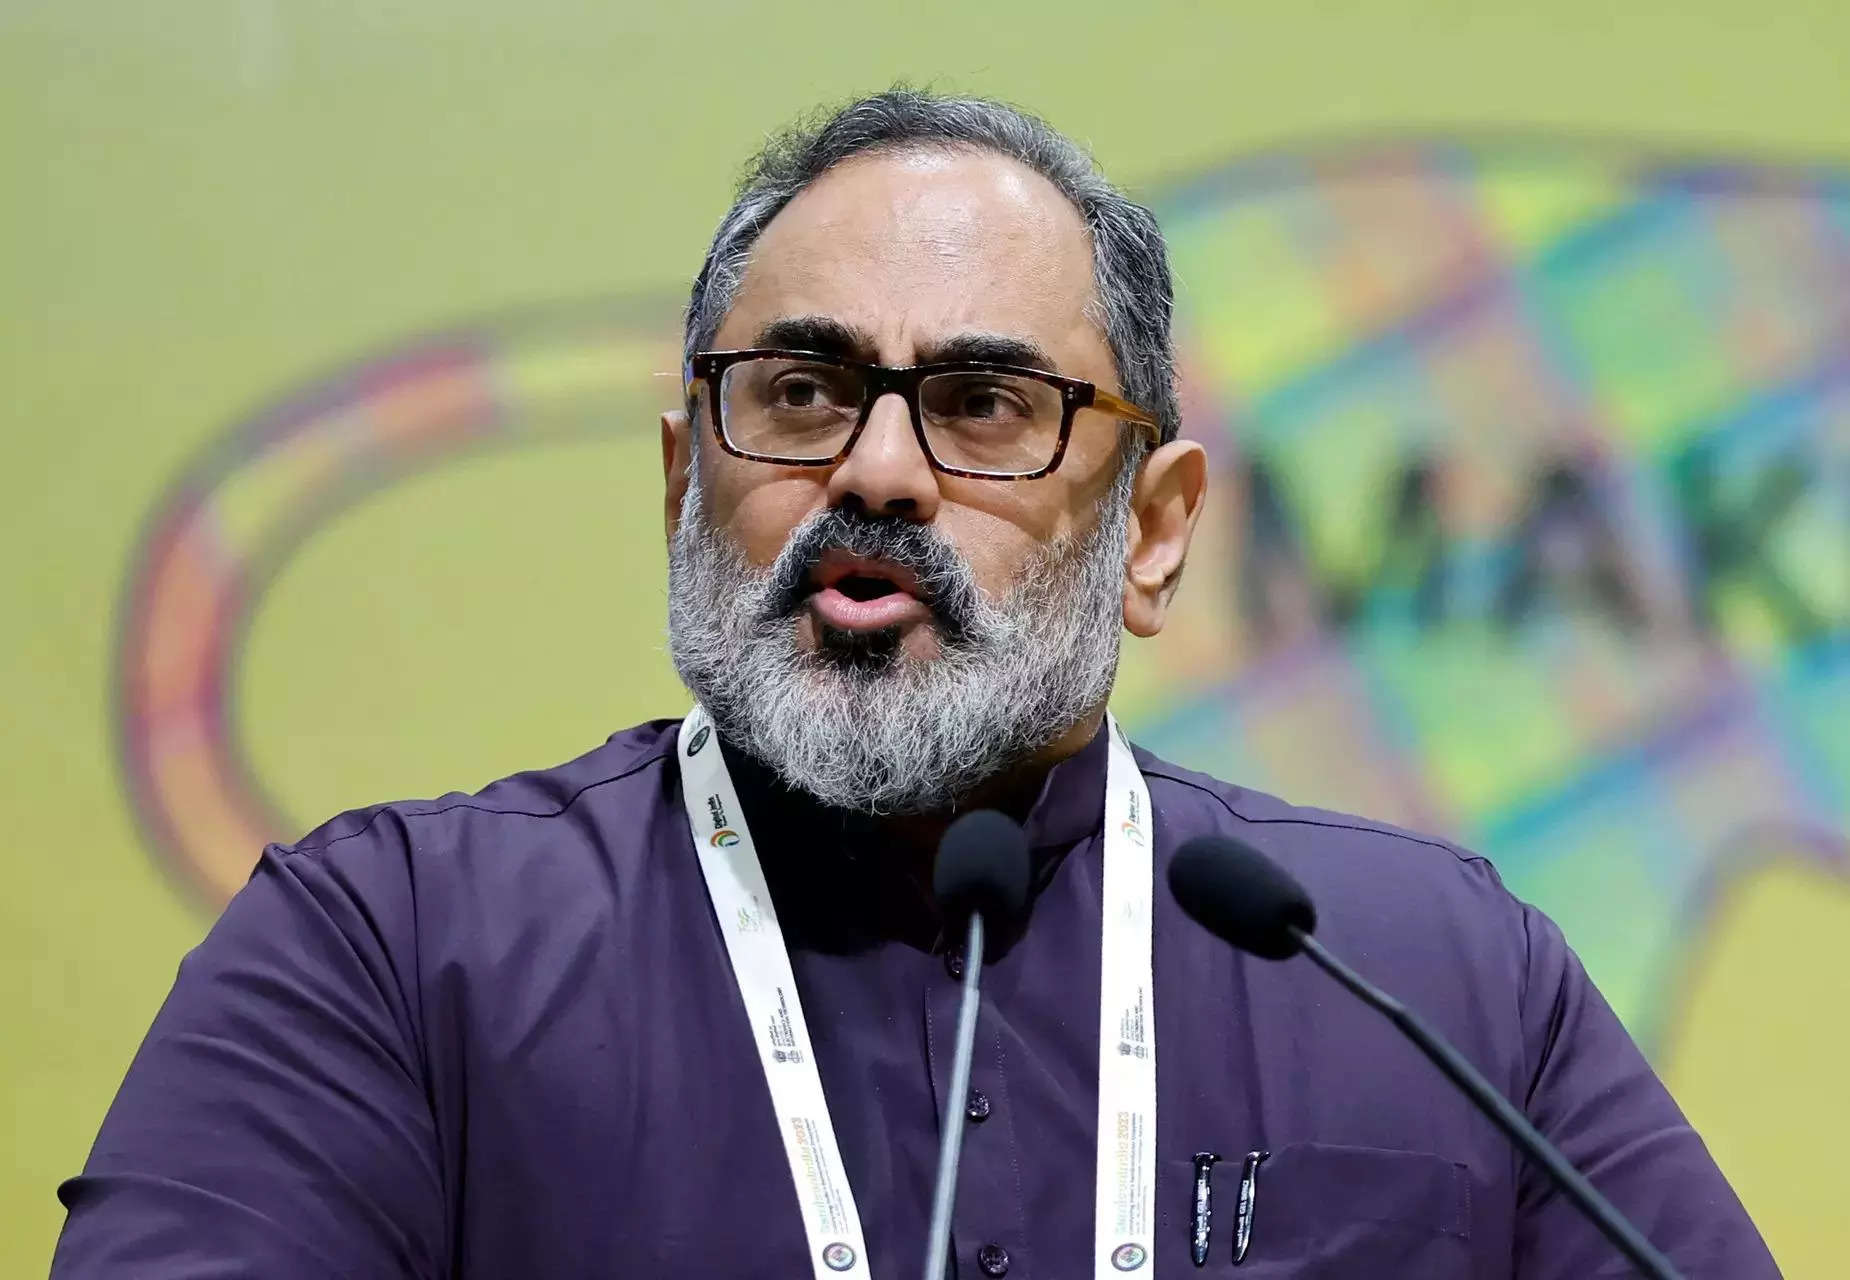 Ambition to grow AI, startup innovations as important as AI safety: MoS IT Rajeev Chandrasekhar 